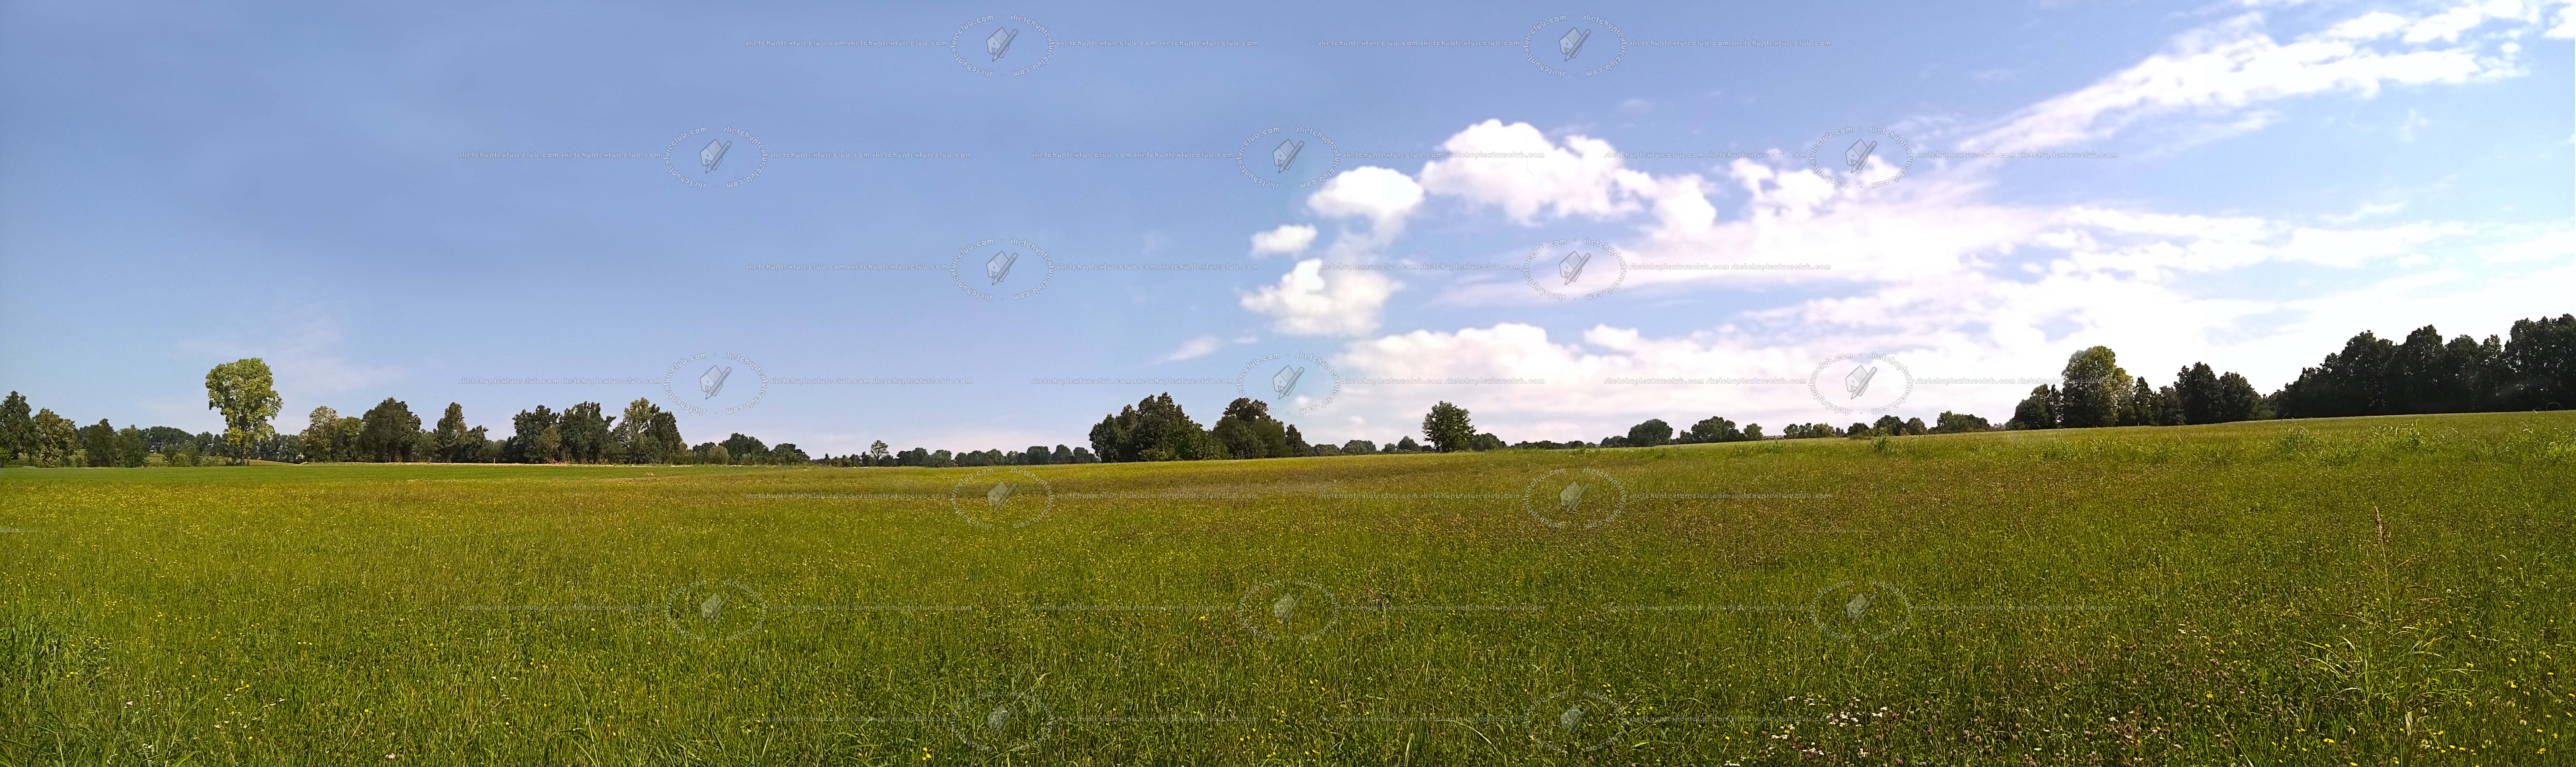 Packs - BACKGROUND - Countryside - High Res Panoramic backgrounds  Countryside pack 1 00026